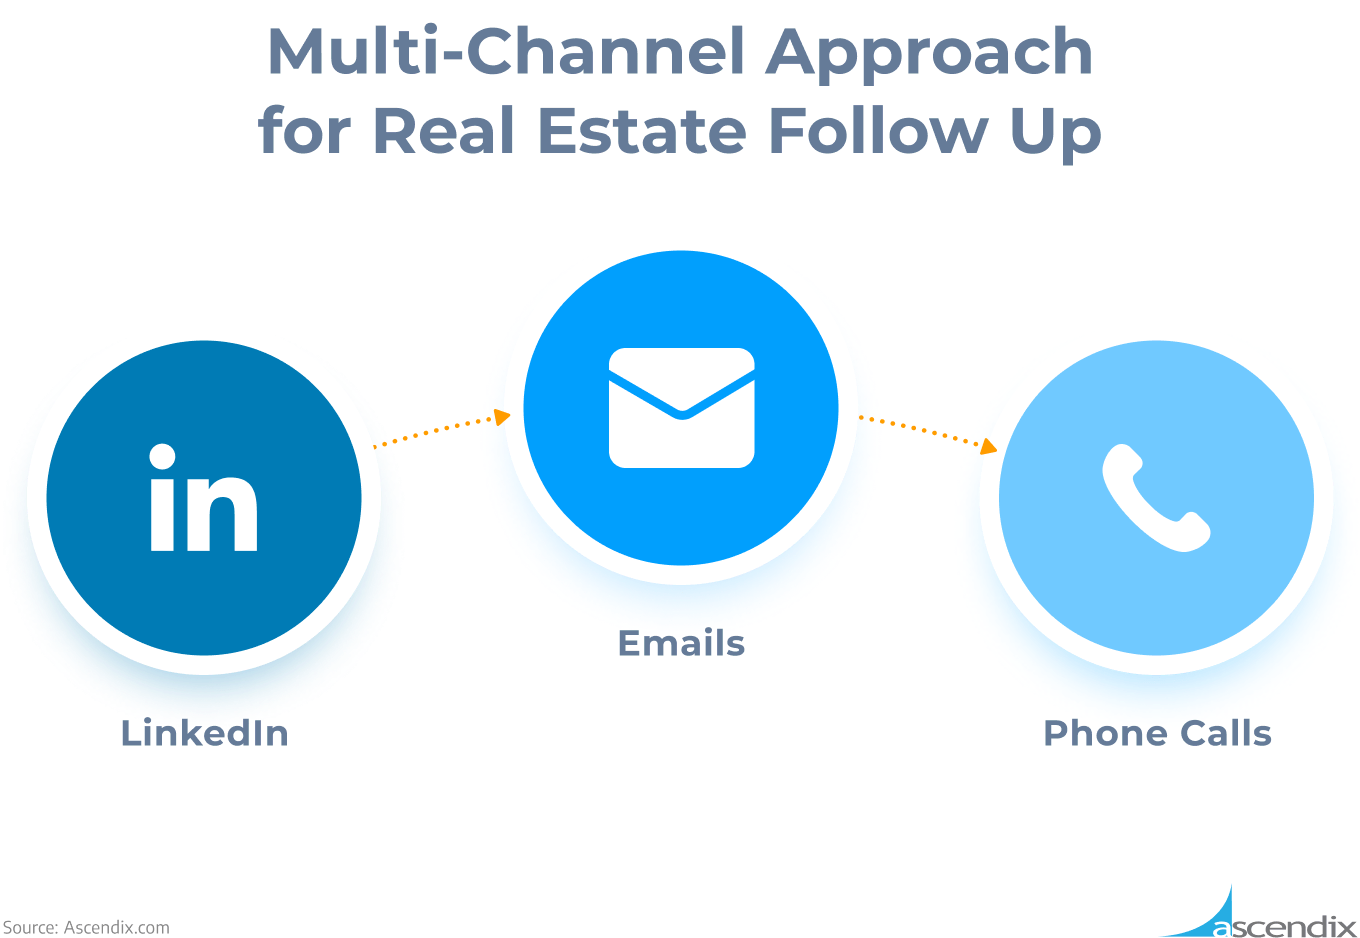 Multi-Channel Approach for Real Estate Follow Up